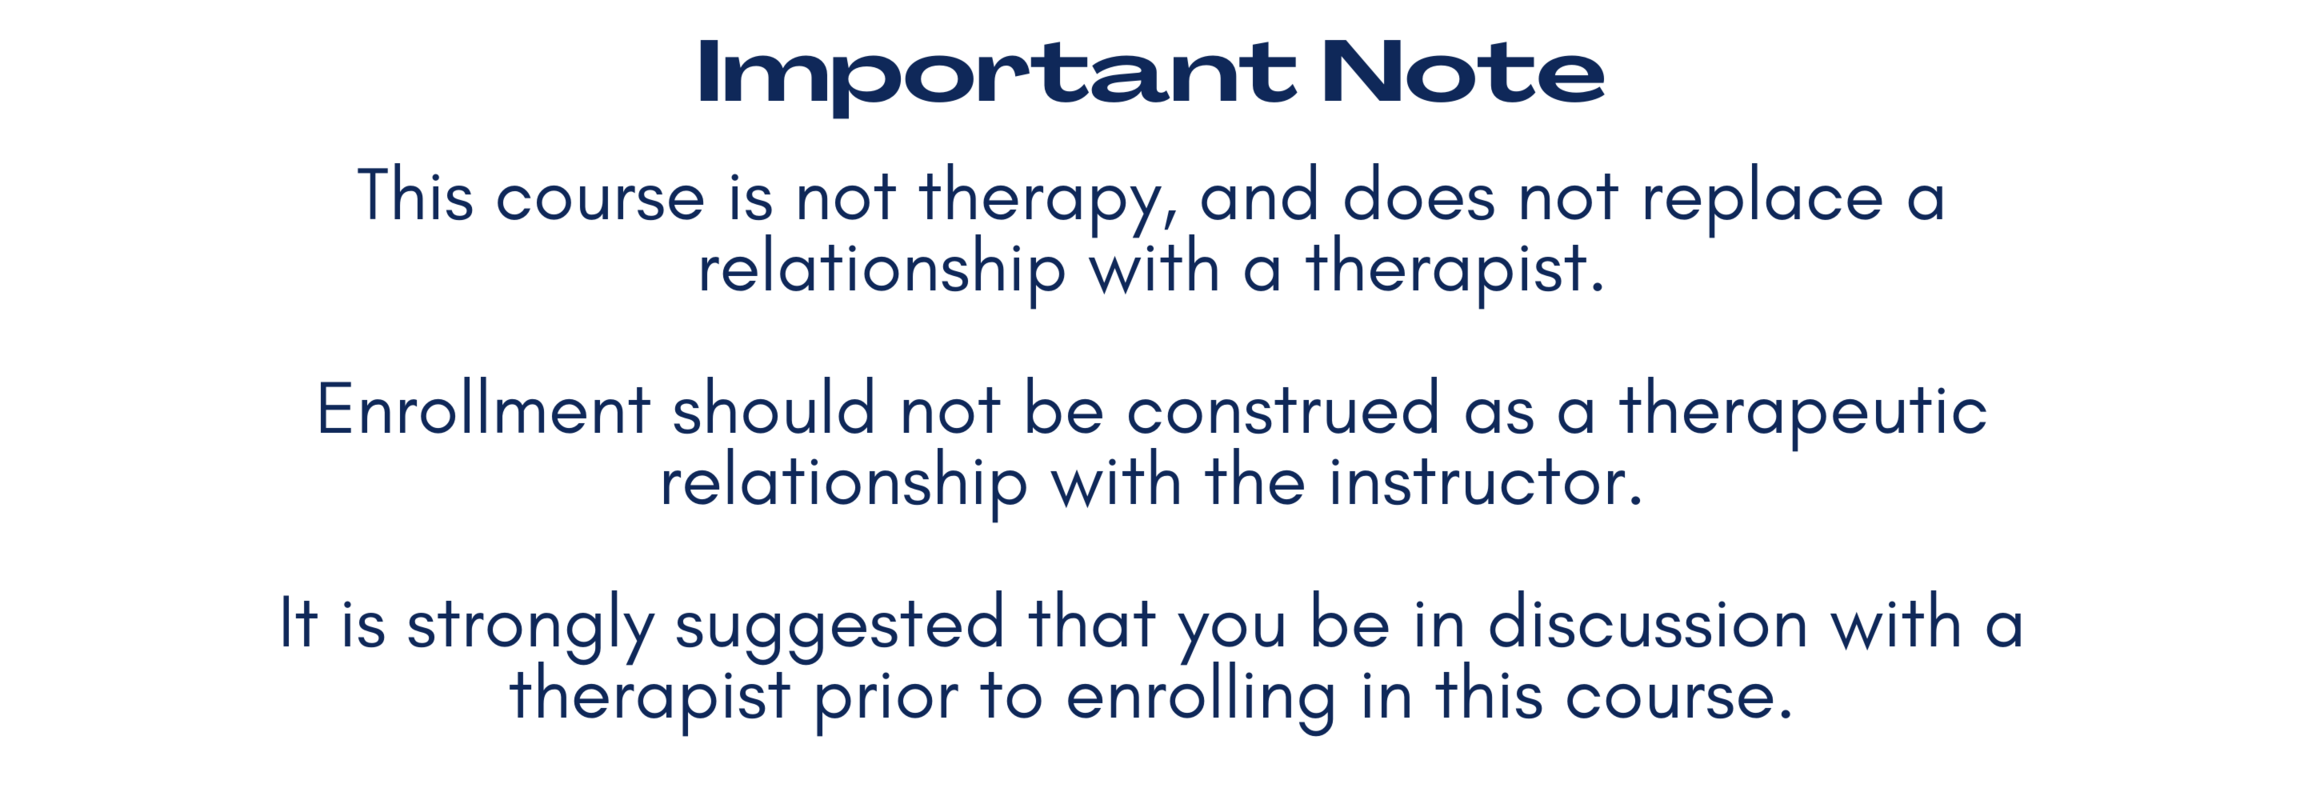 Evergreen Important Note: this course is not therapy.